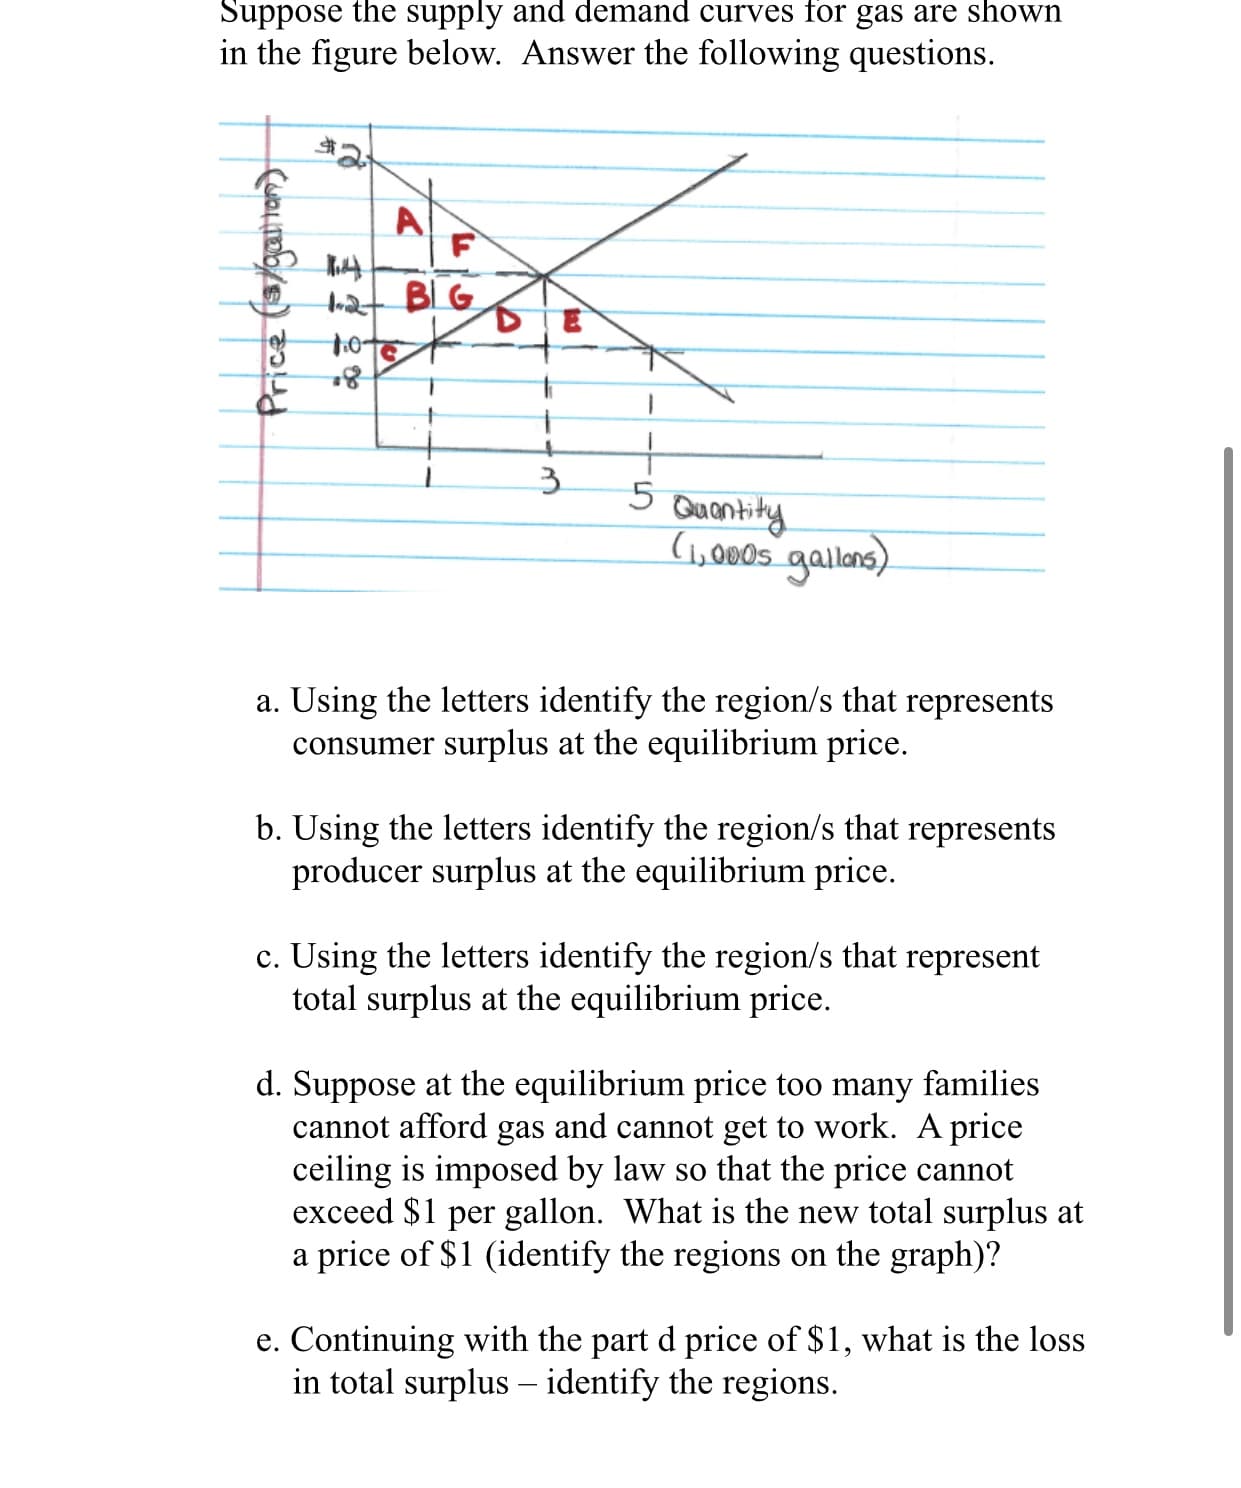 Suppose the supply and demand curves for gas are shown
in the figure below. Answer the following questions.
A
at BIG
3.
Quantity
(,000s gallars)
a. Using the letters identify the region/s that represents
consumer surplus at the equilibrium price.
b. Using the letters identify the region/s that represents
producer surplus at the equilibrium price.
c. Using the letters identify the region/s that represent
total surplus at the equilibrium price.
Price (3/gaiton)
